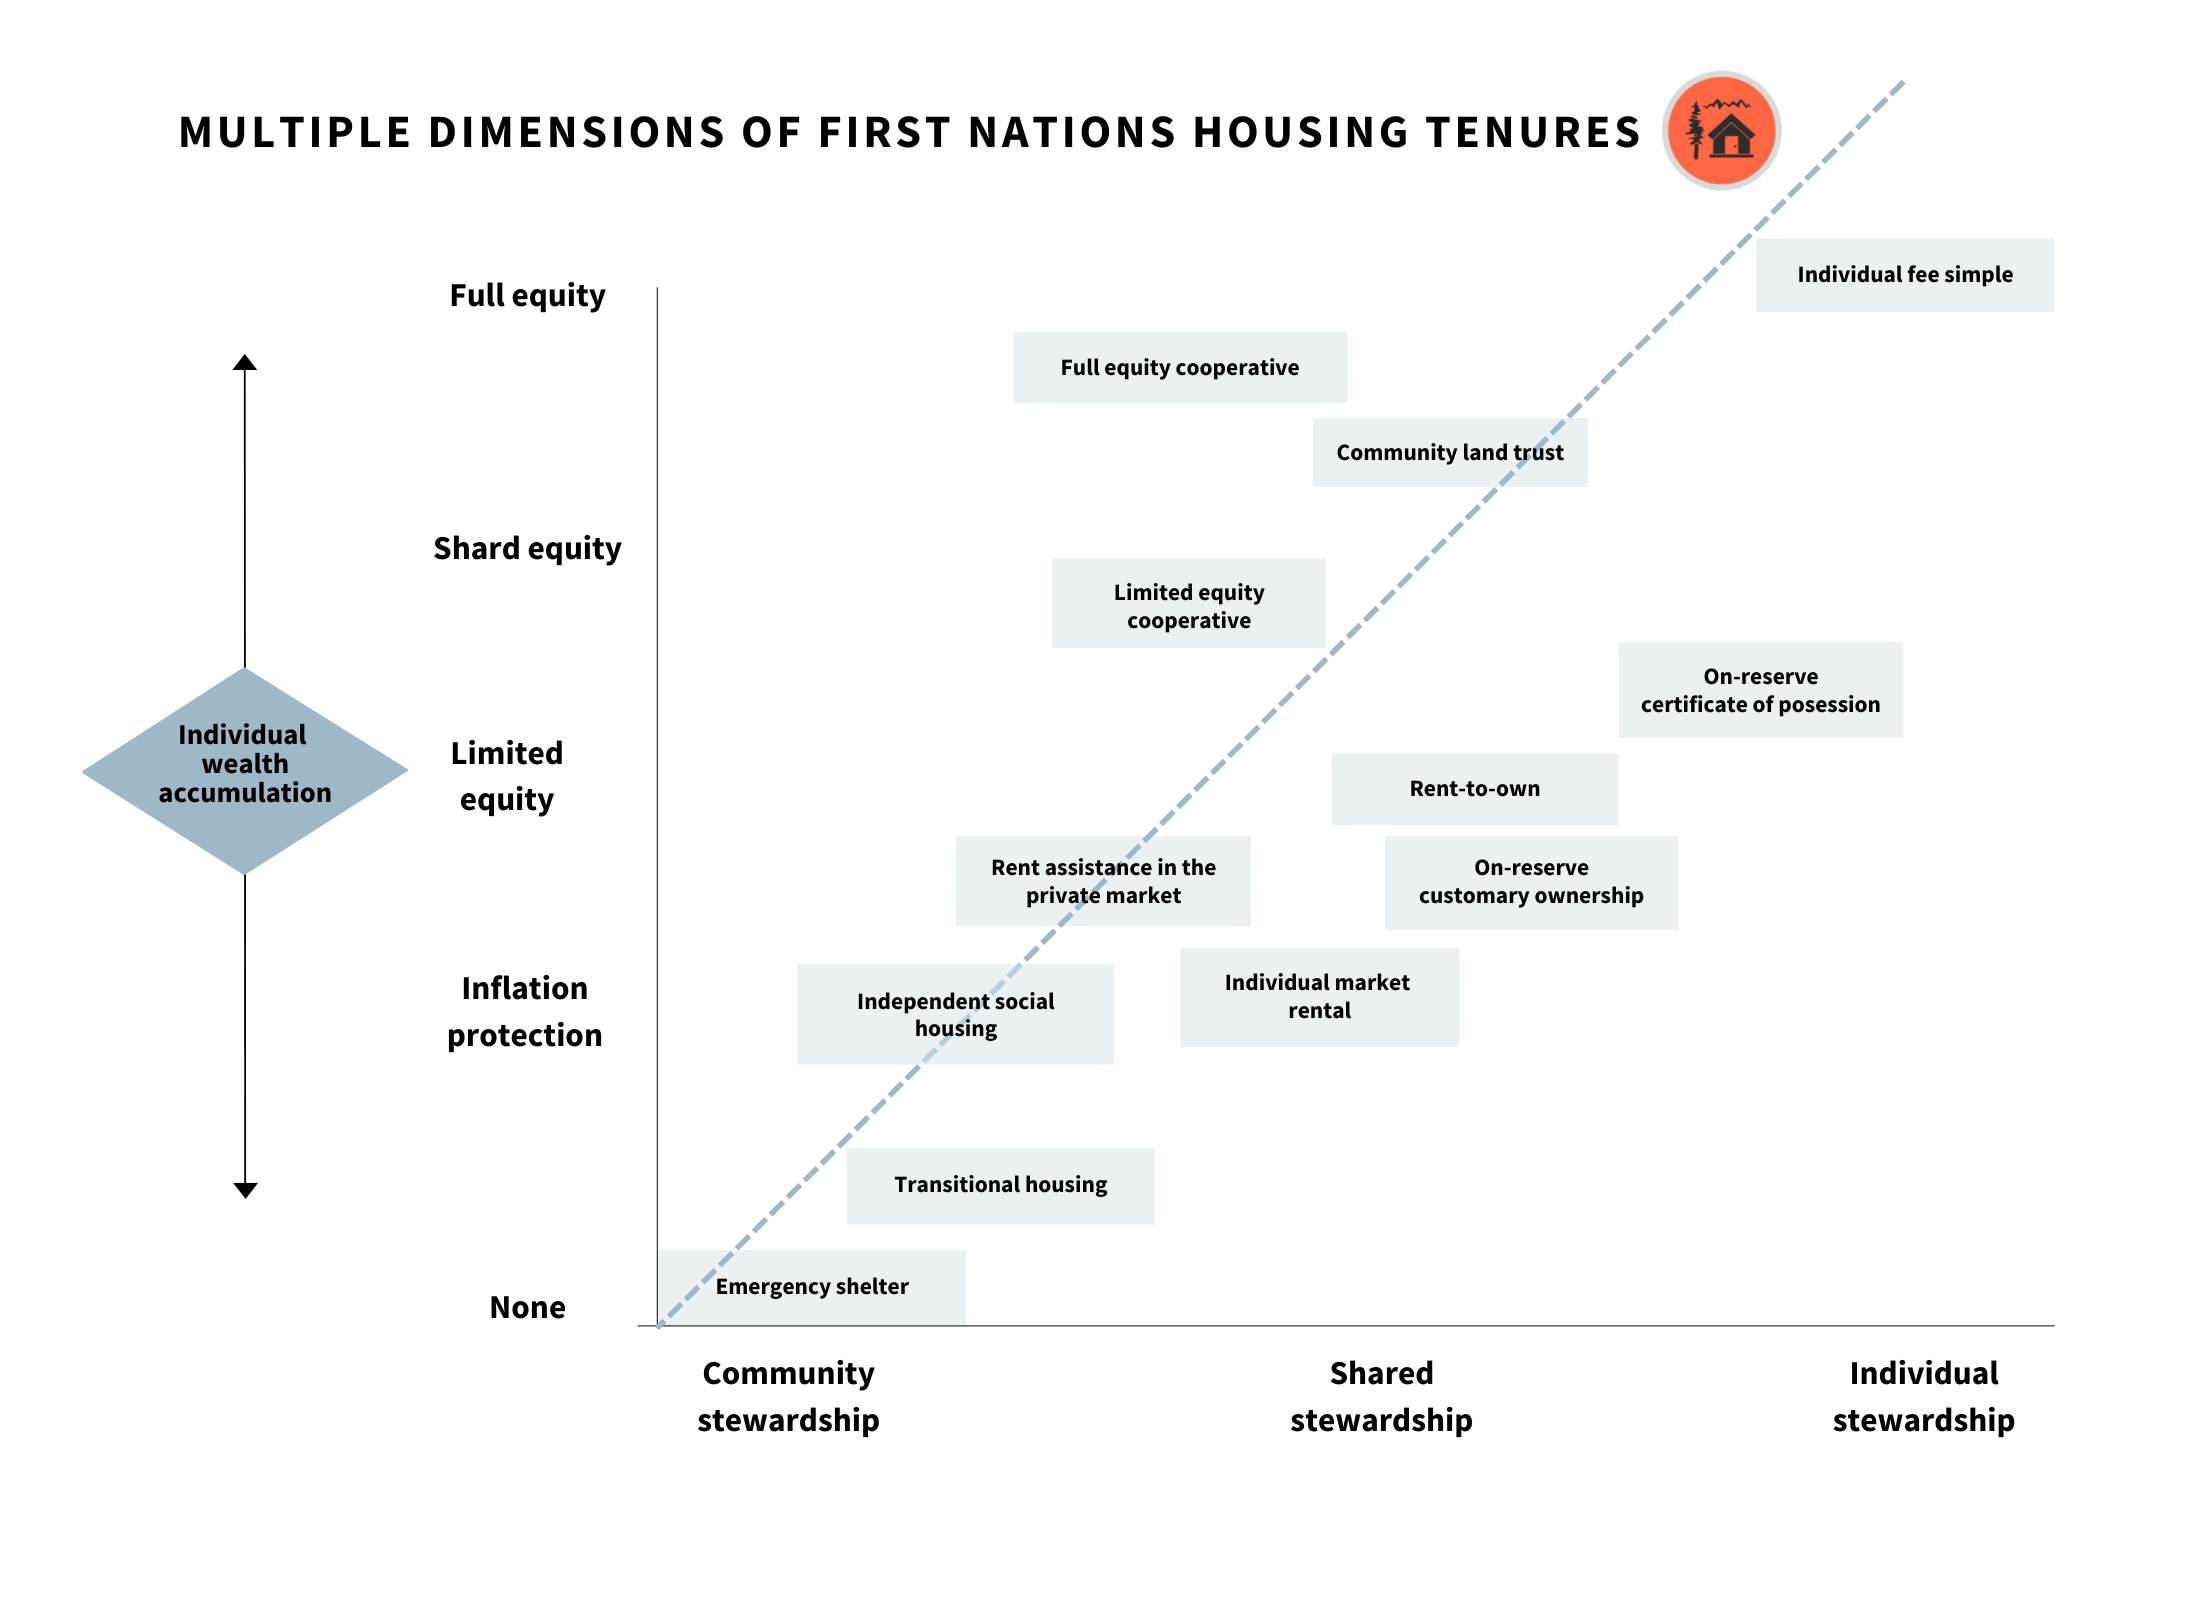 Multiple Dimensions of First Nations Housing Tenures